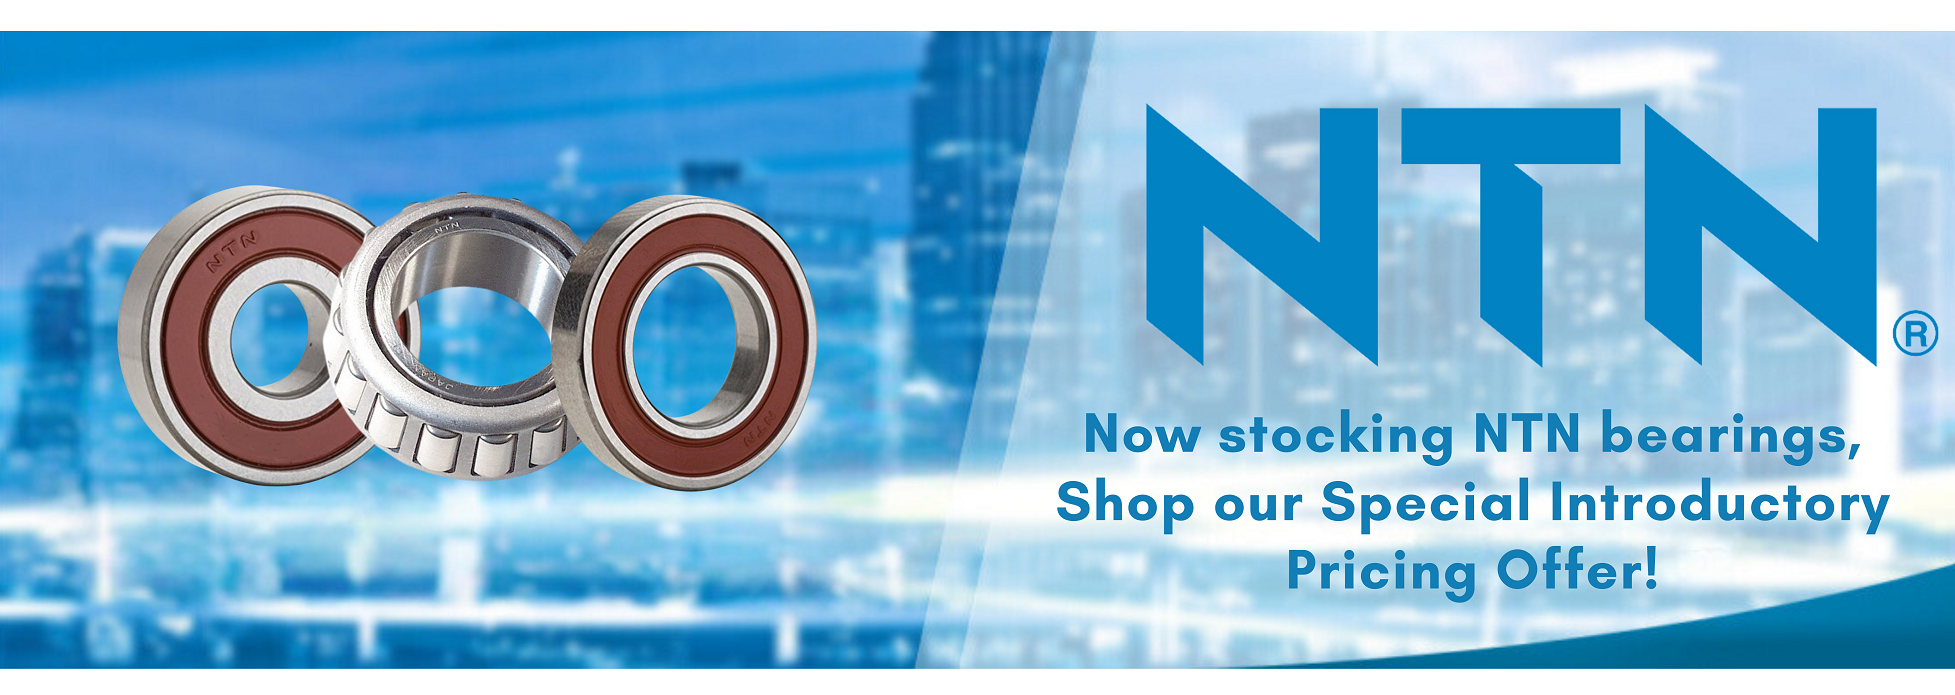 Reliance Introduces NTN Bearings: Shop Now for Special Offers and Optimal Performance!